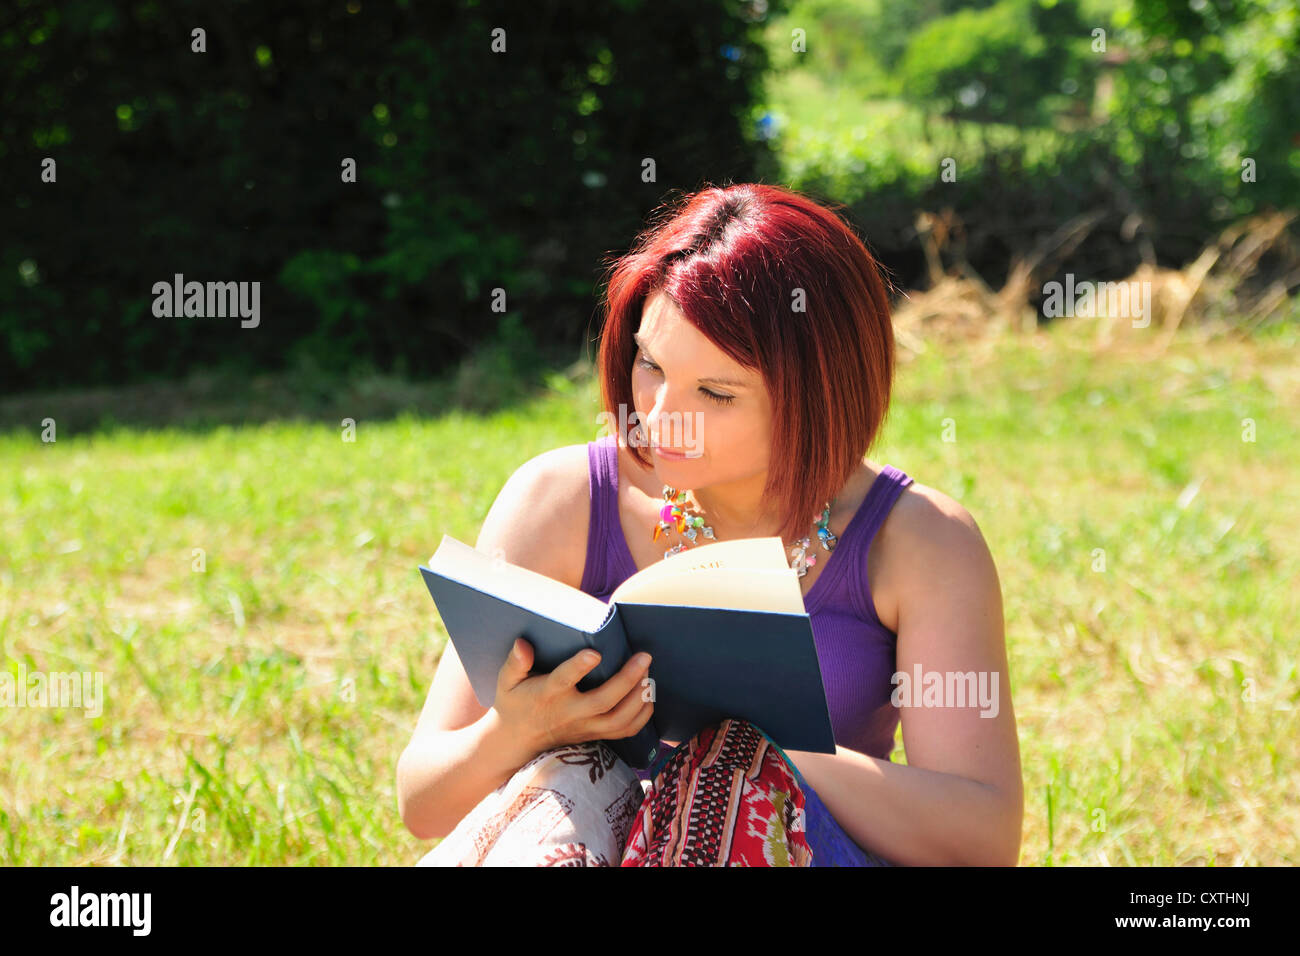 Woman reading book in grass Stock Photo